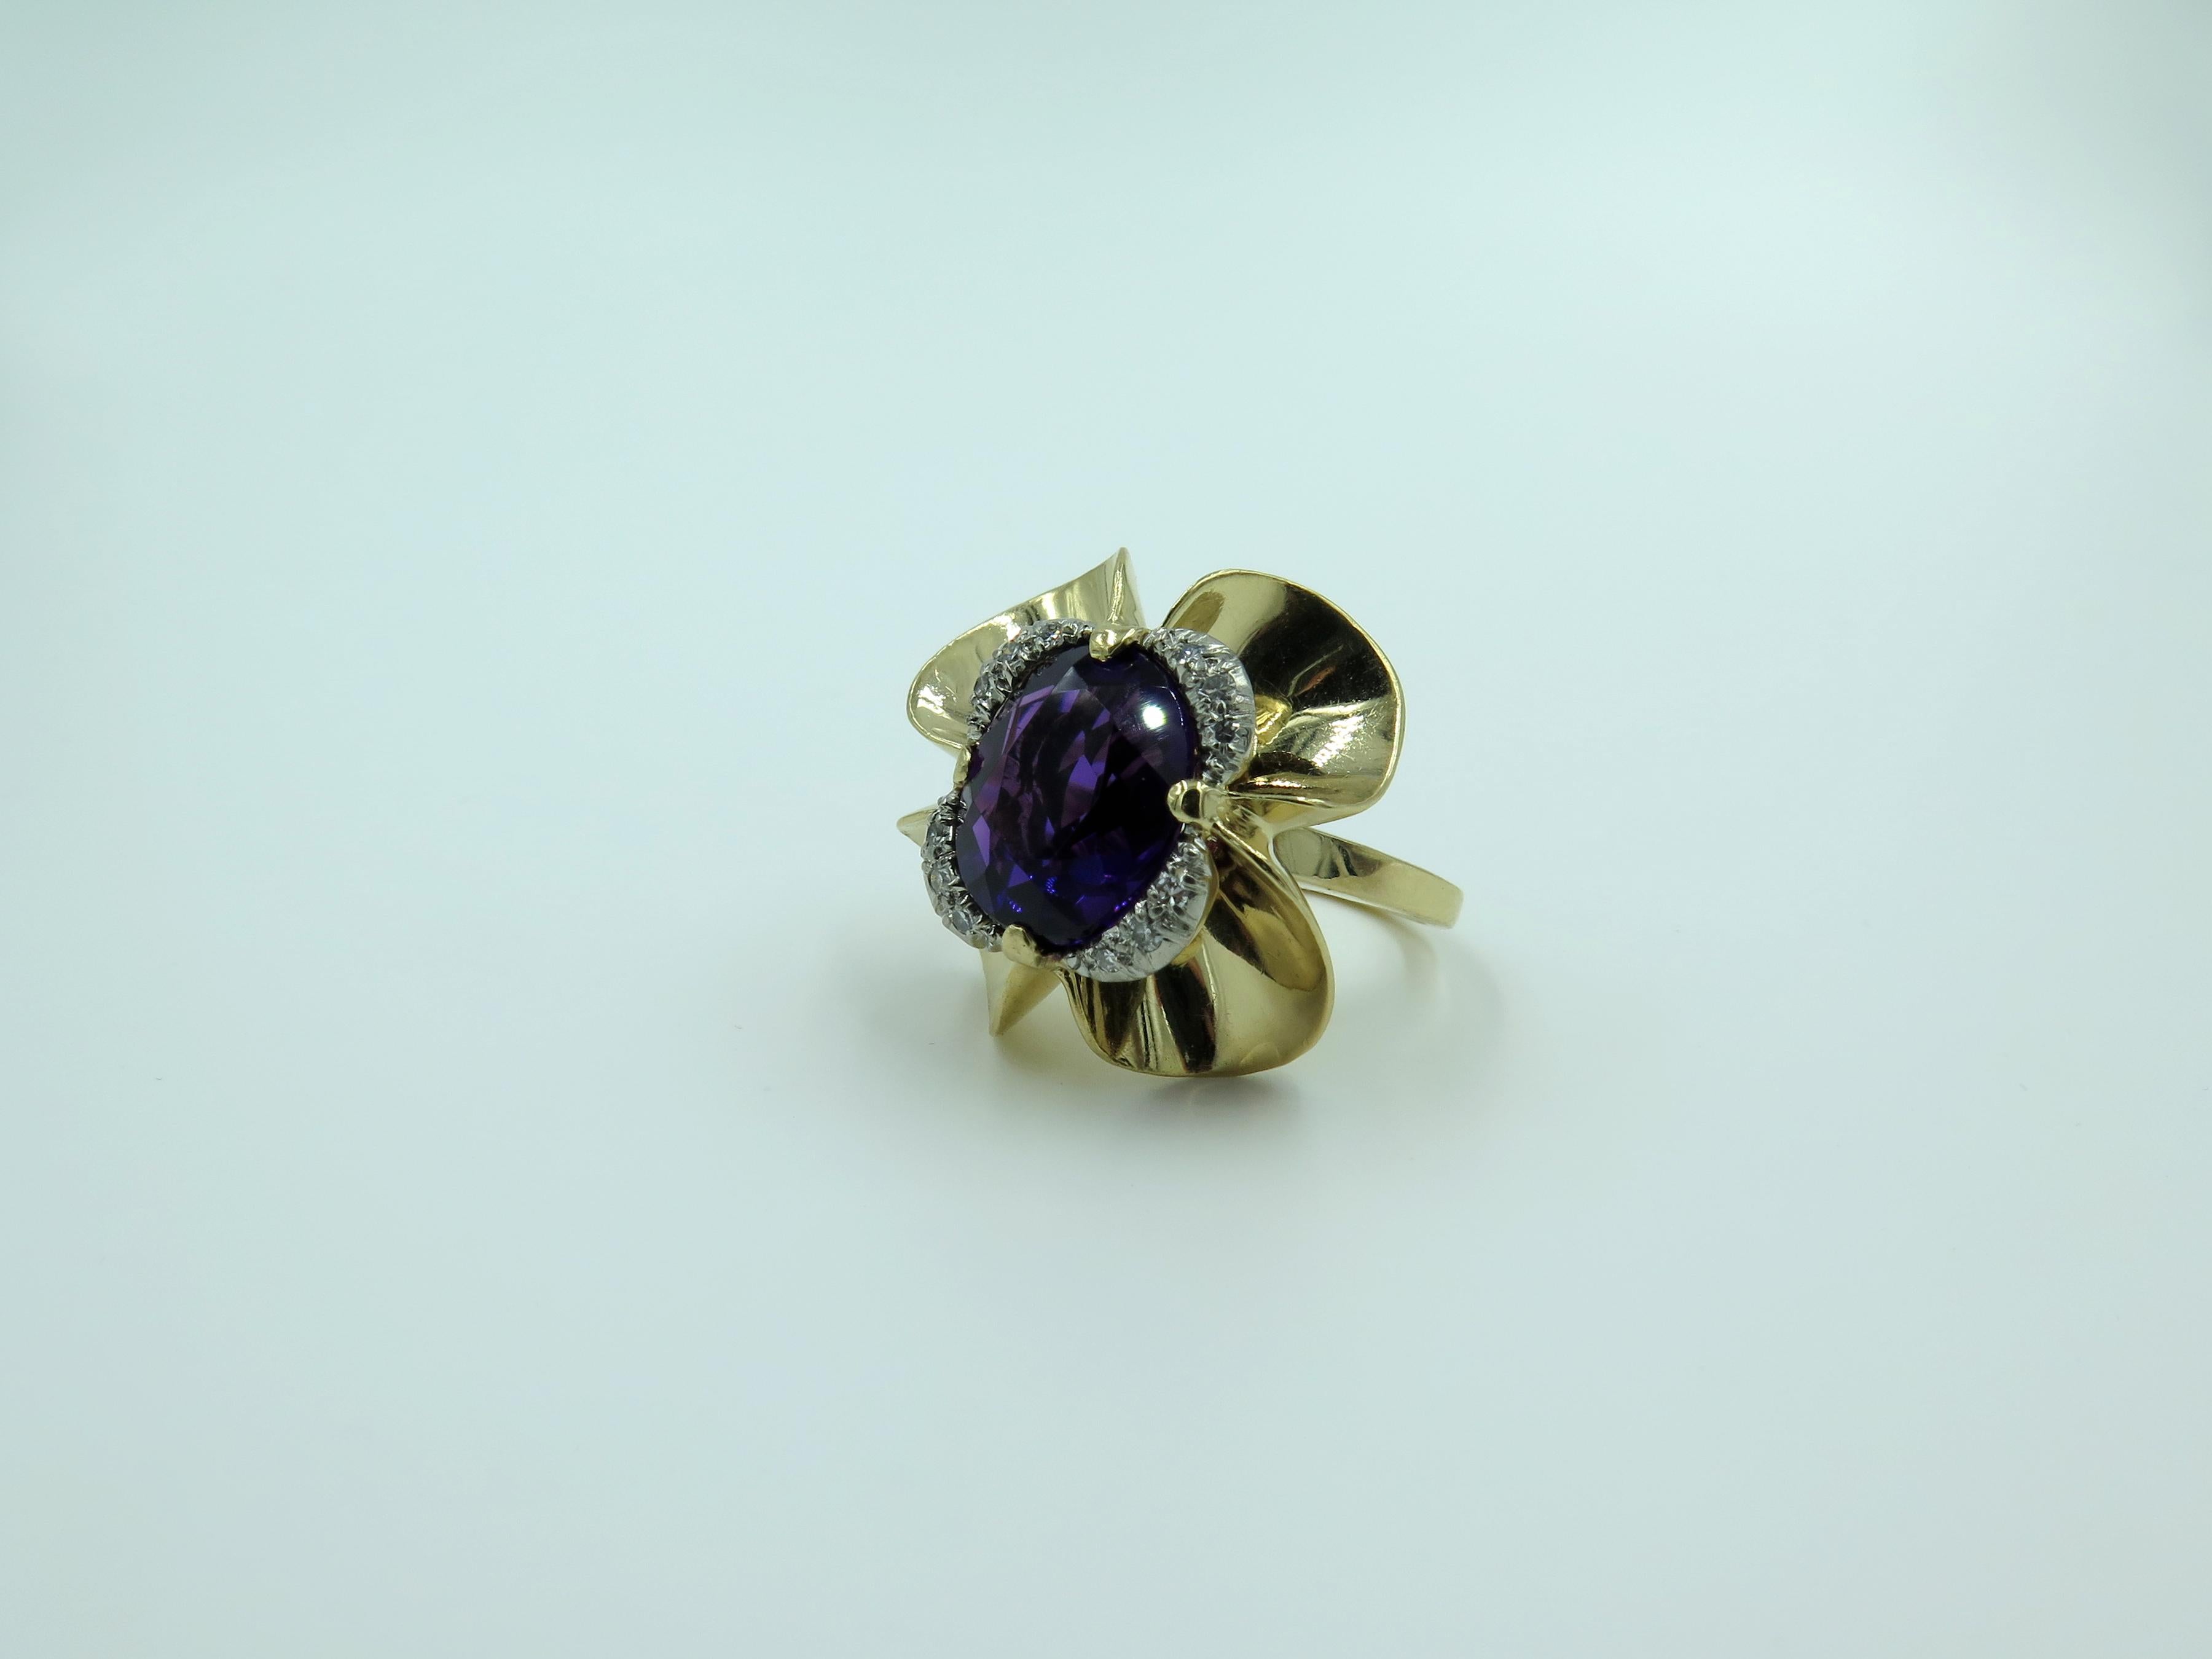 A 14 karat yellow gold, amethyst and diamond ring. Tiffany & Co. Circa 1940. Designed as a polished gold flower head, centering an oval cut amethyst, measuring approximately 11.50 x 10.00 x 5.70mm and weighing approximately 3.50 carats, within an